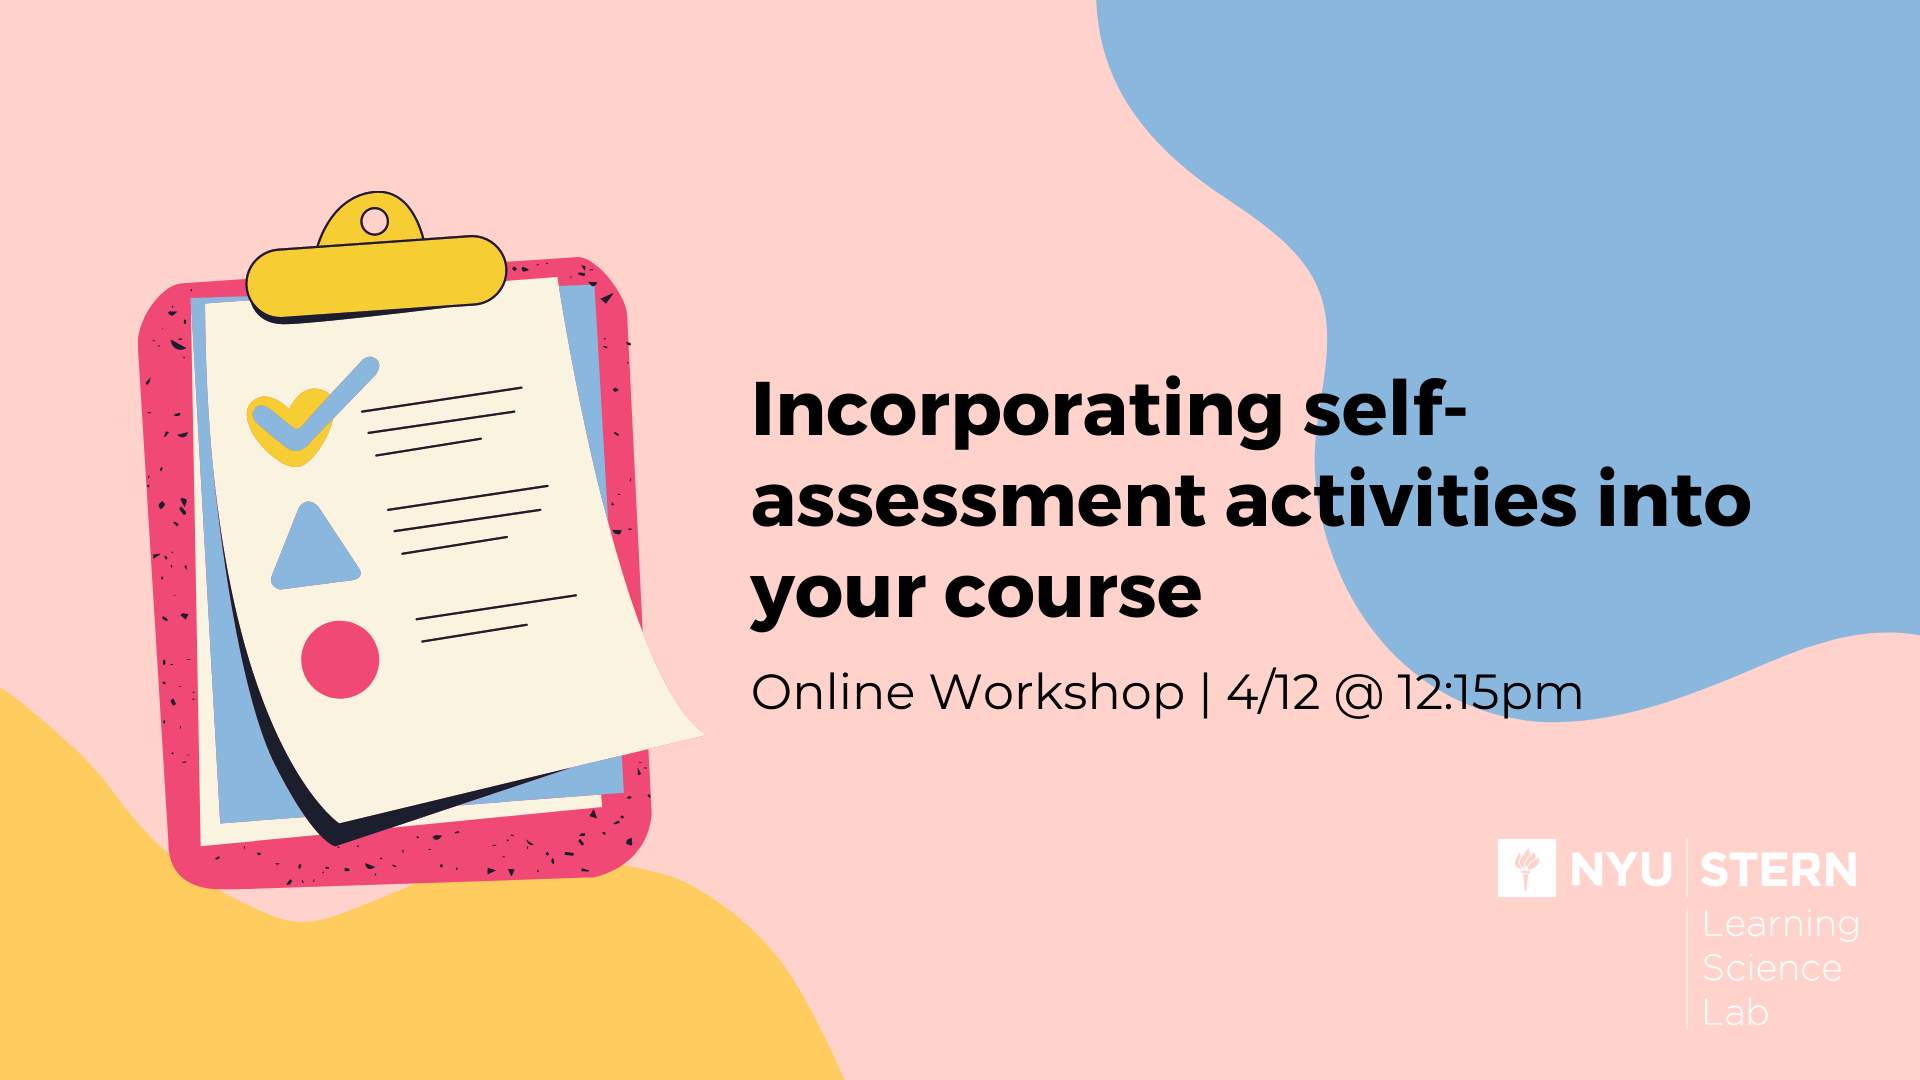 Incorporating self-assessment activities into your course